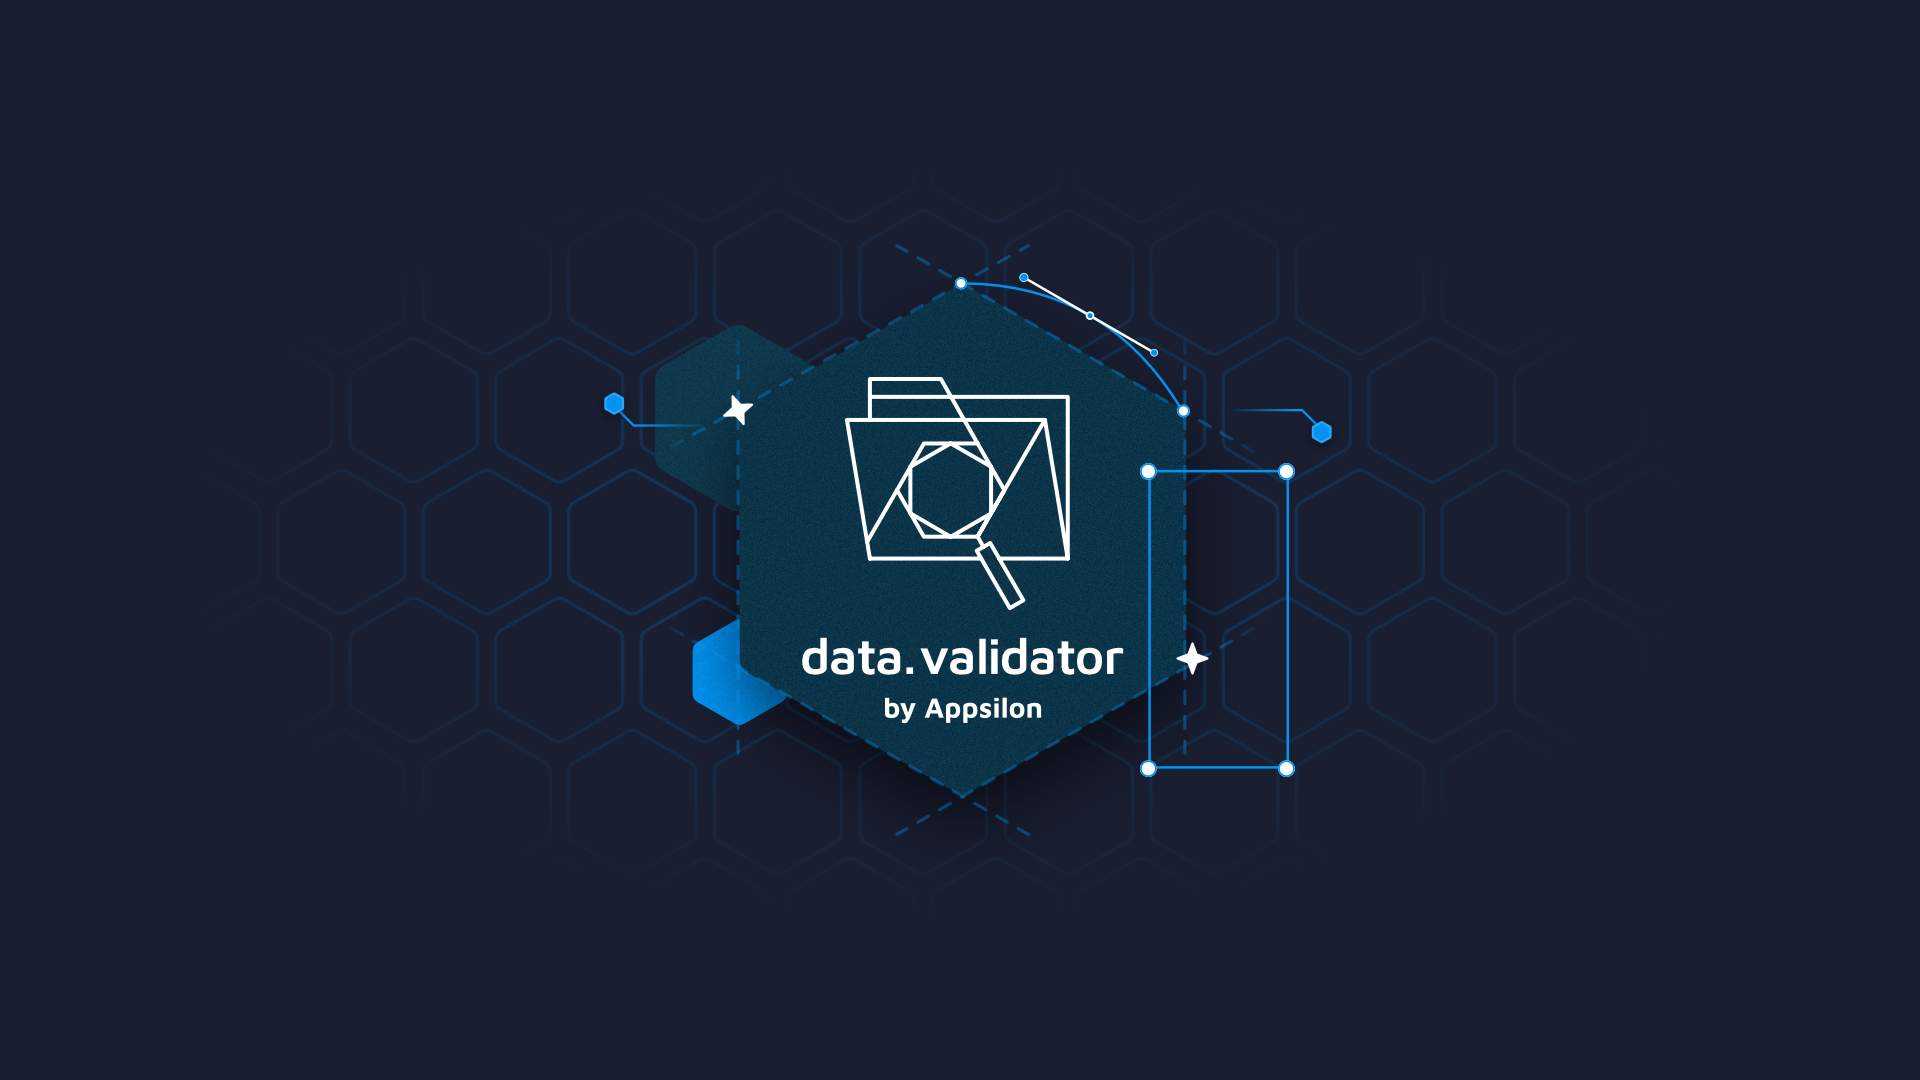 Data Validator in R Shiny for automated reports